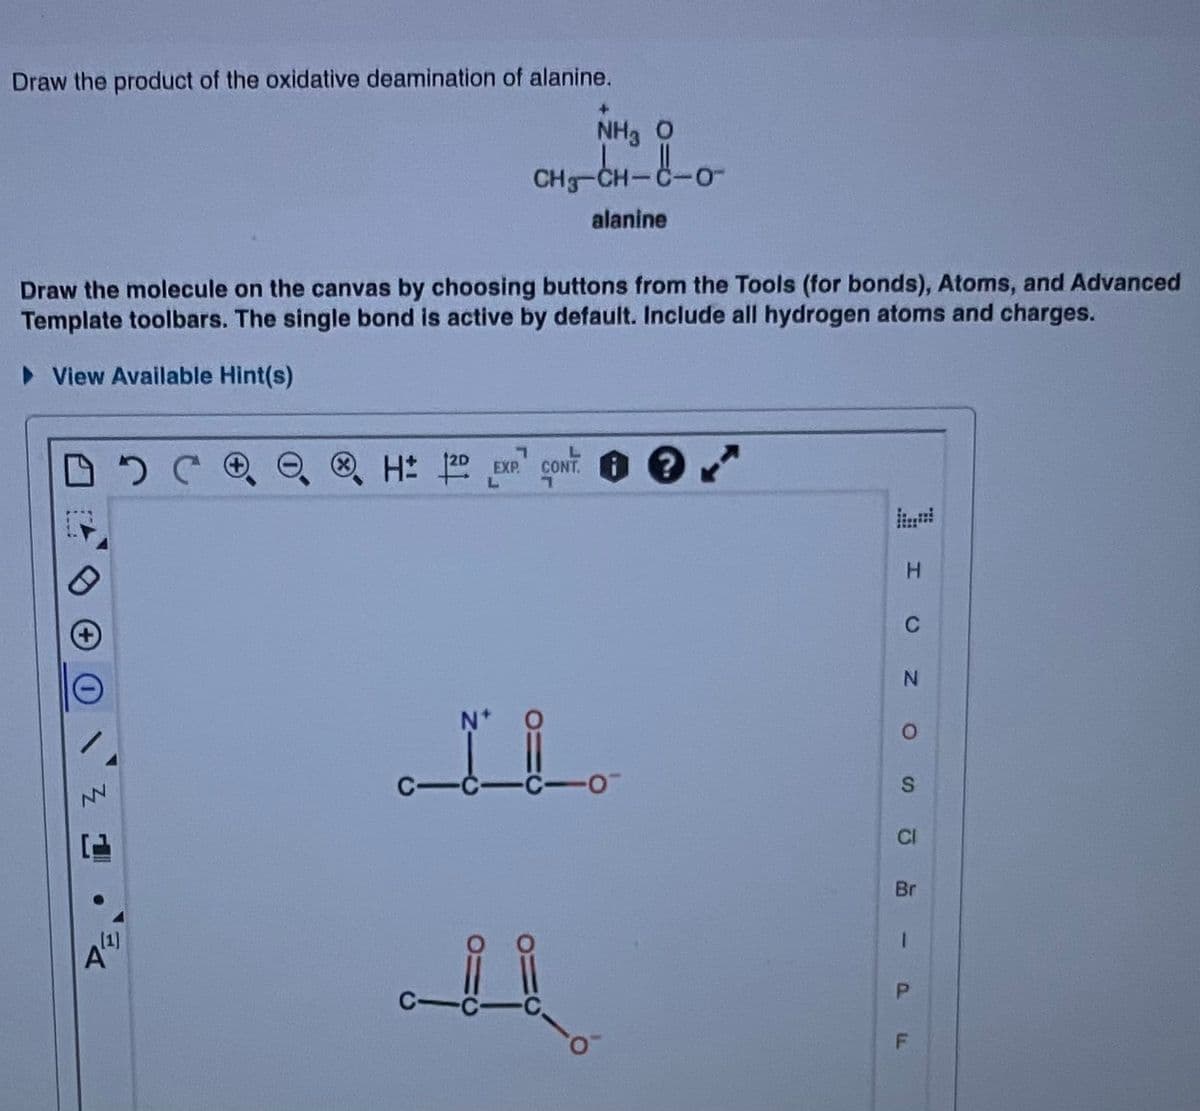 Draw the product of the oxidative deamination of alanine.
NH3 O
CHg-CH-
-0-
alanine
Draw the molecule on the canvas by choosing buttons from the Tools (for bonds), Atoms, and Advanced
Template toolbars. The single bond is active by default. Include all hydrogen atoms and charges.
• View Available Hint(s)
®H: 0
CONT. ?
EXP.
C
N.
NV
CI
Br
1]
1.
S.
P.
